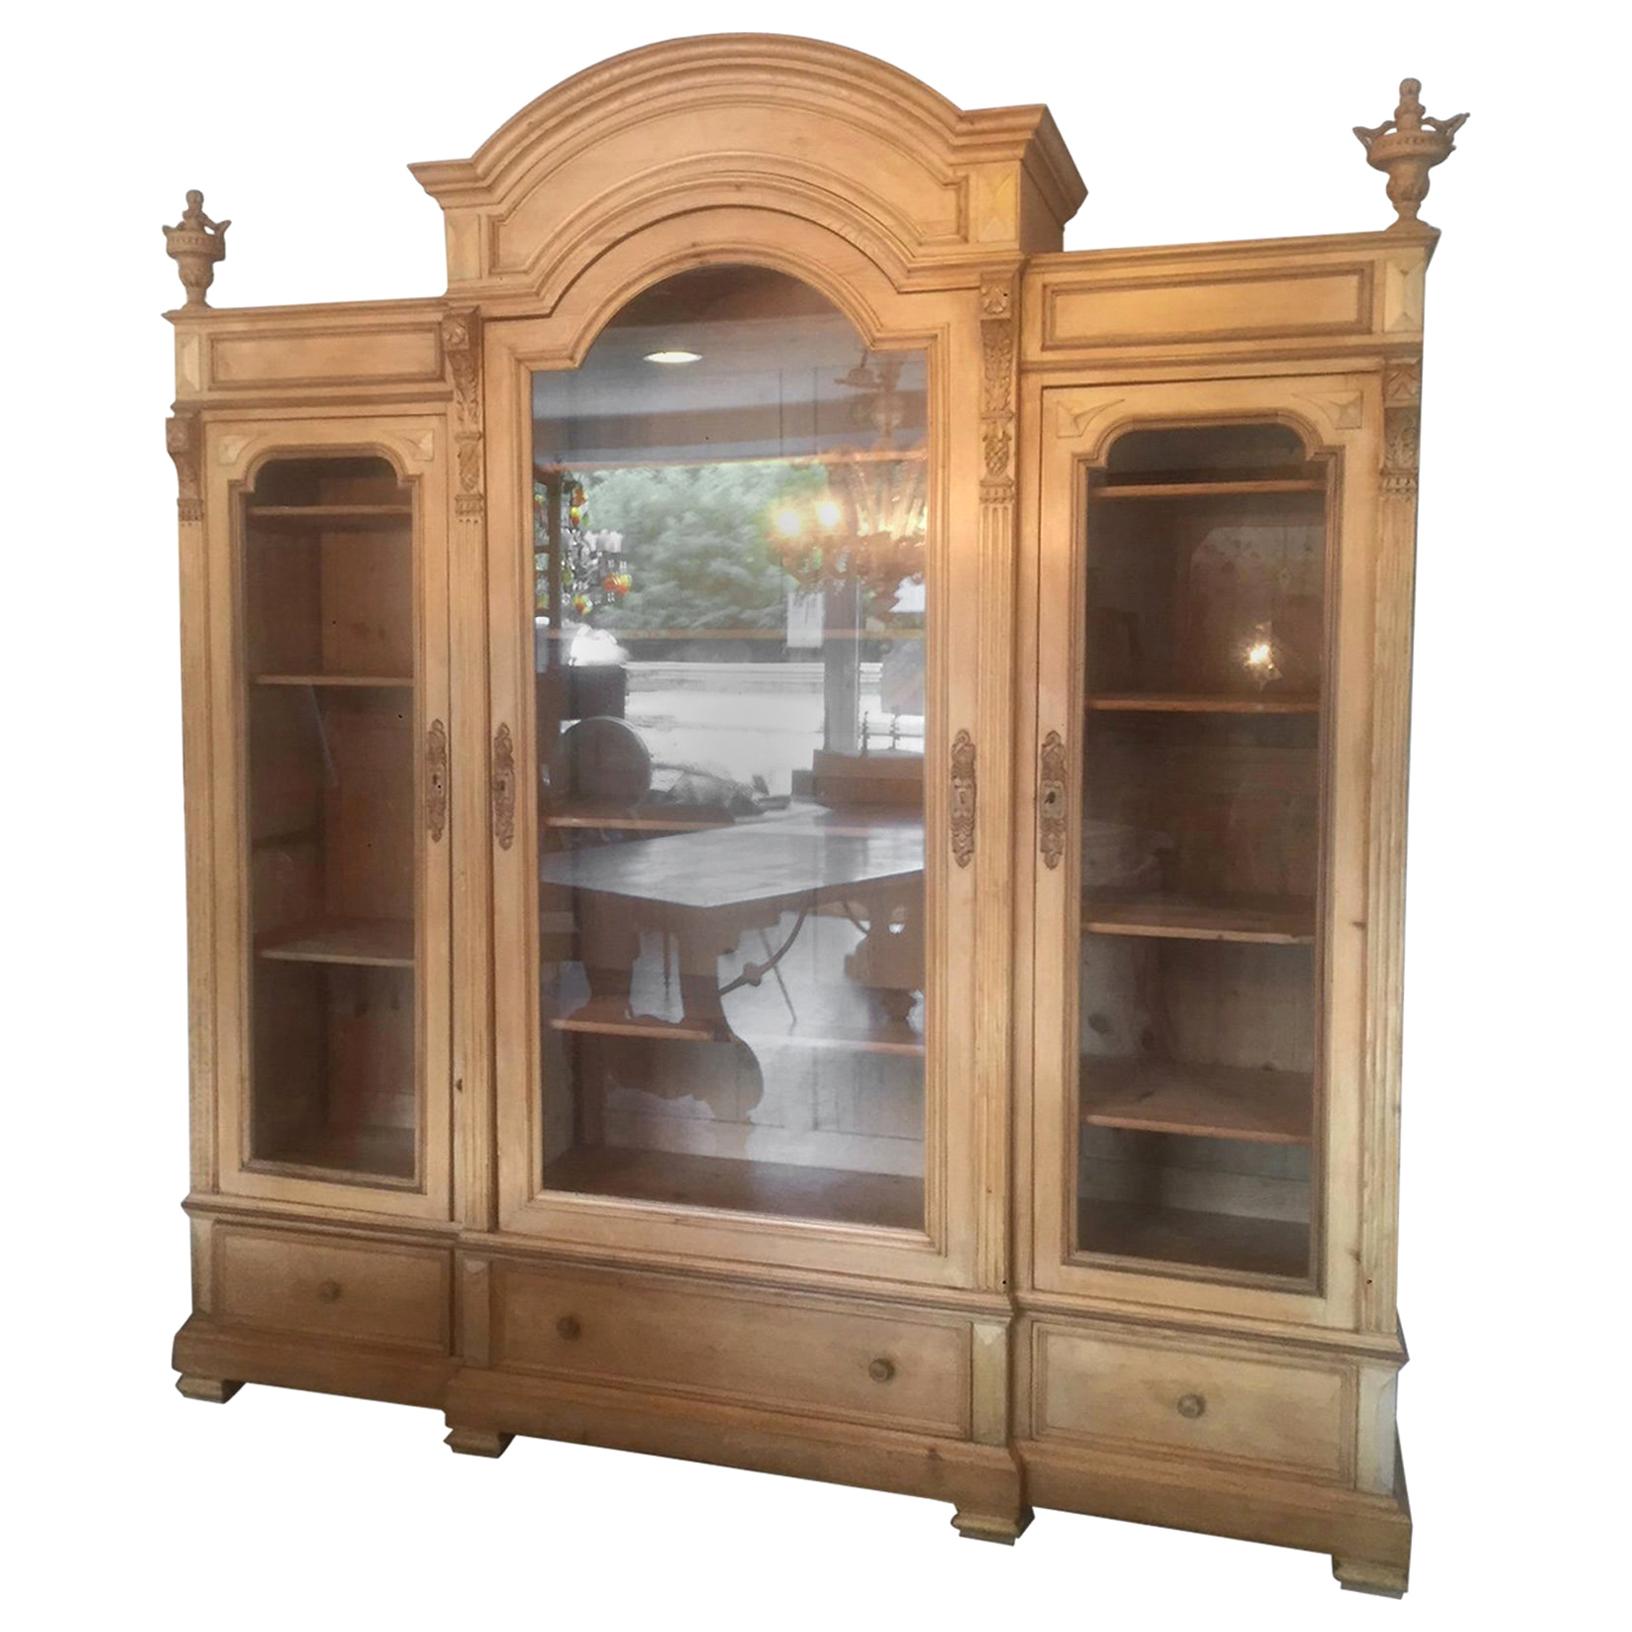 Early 20th Century French Pine Wood Bibliotheque, 1900s